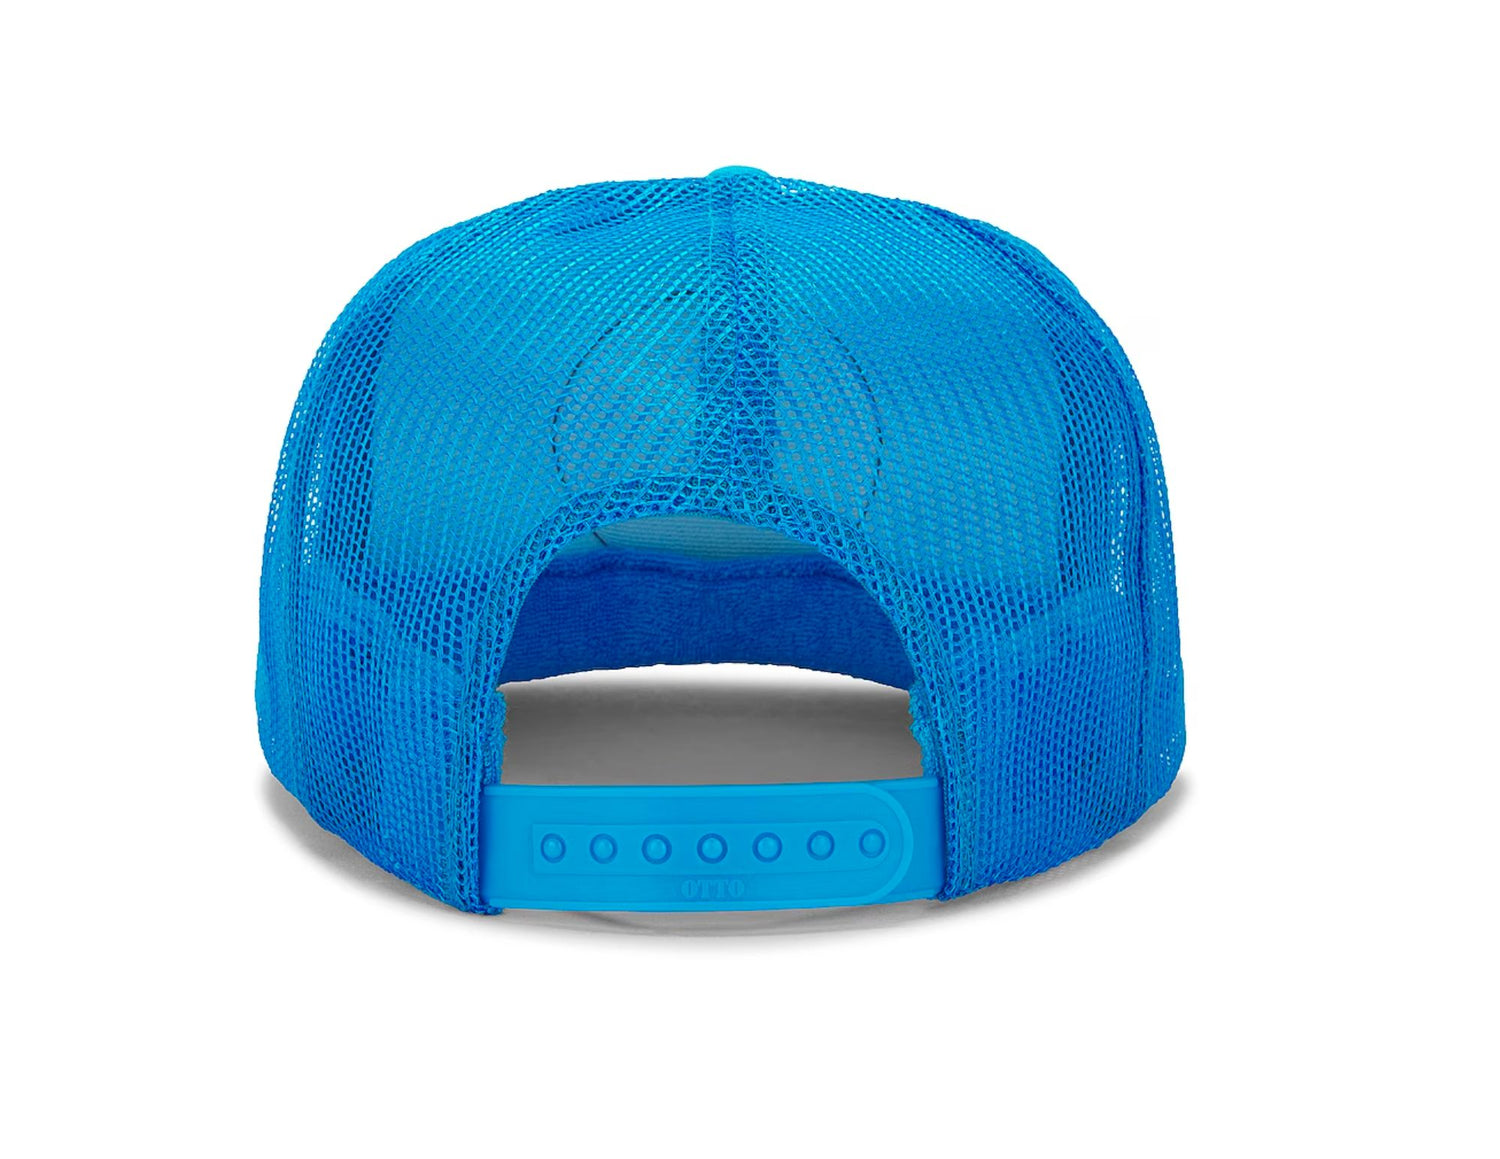 Unisex trucker hat featuring a versatile design with breathable mesh panels and adjustable snapback closure